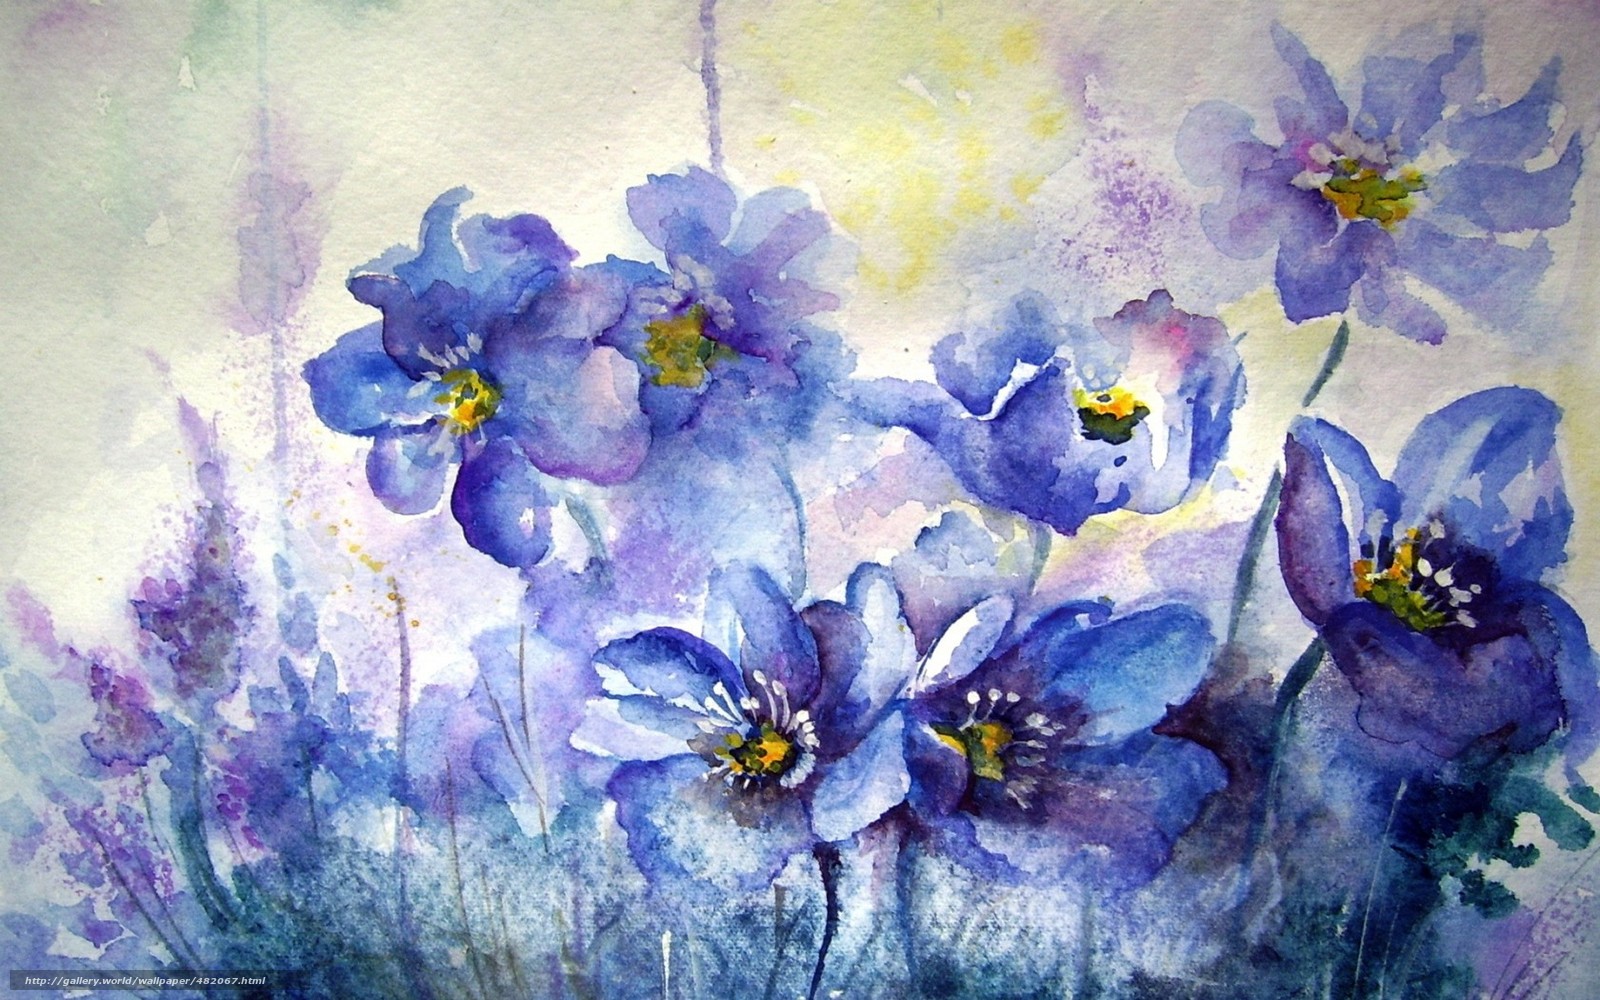 Download Wallpaper Flowers, Picture, Watercolor Free - Watercolor Flowers - HD Wallpaper 